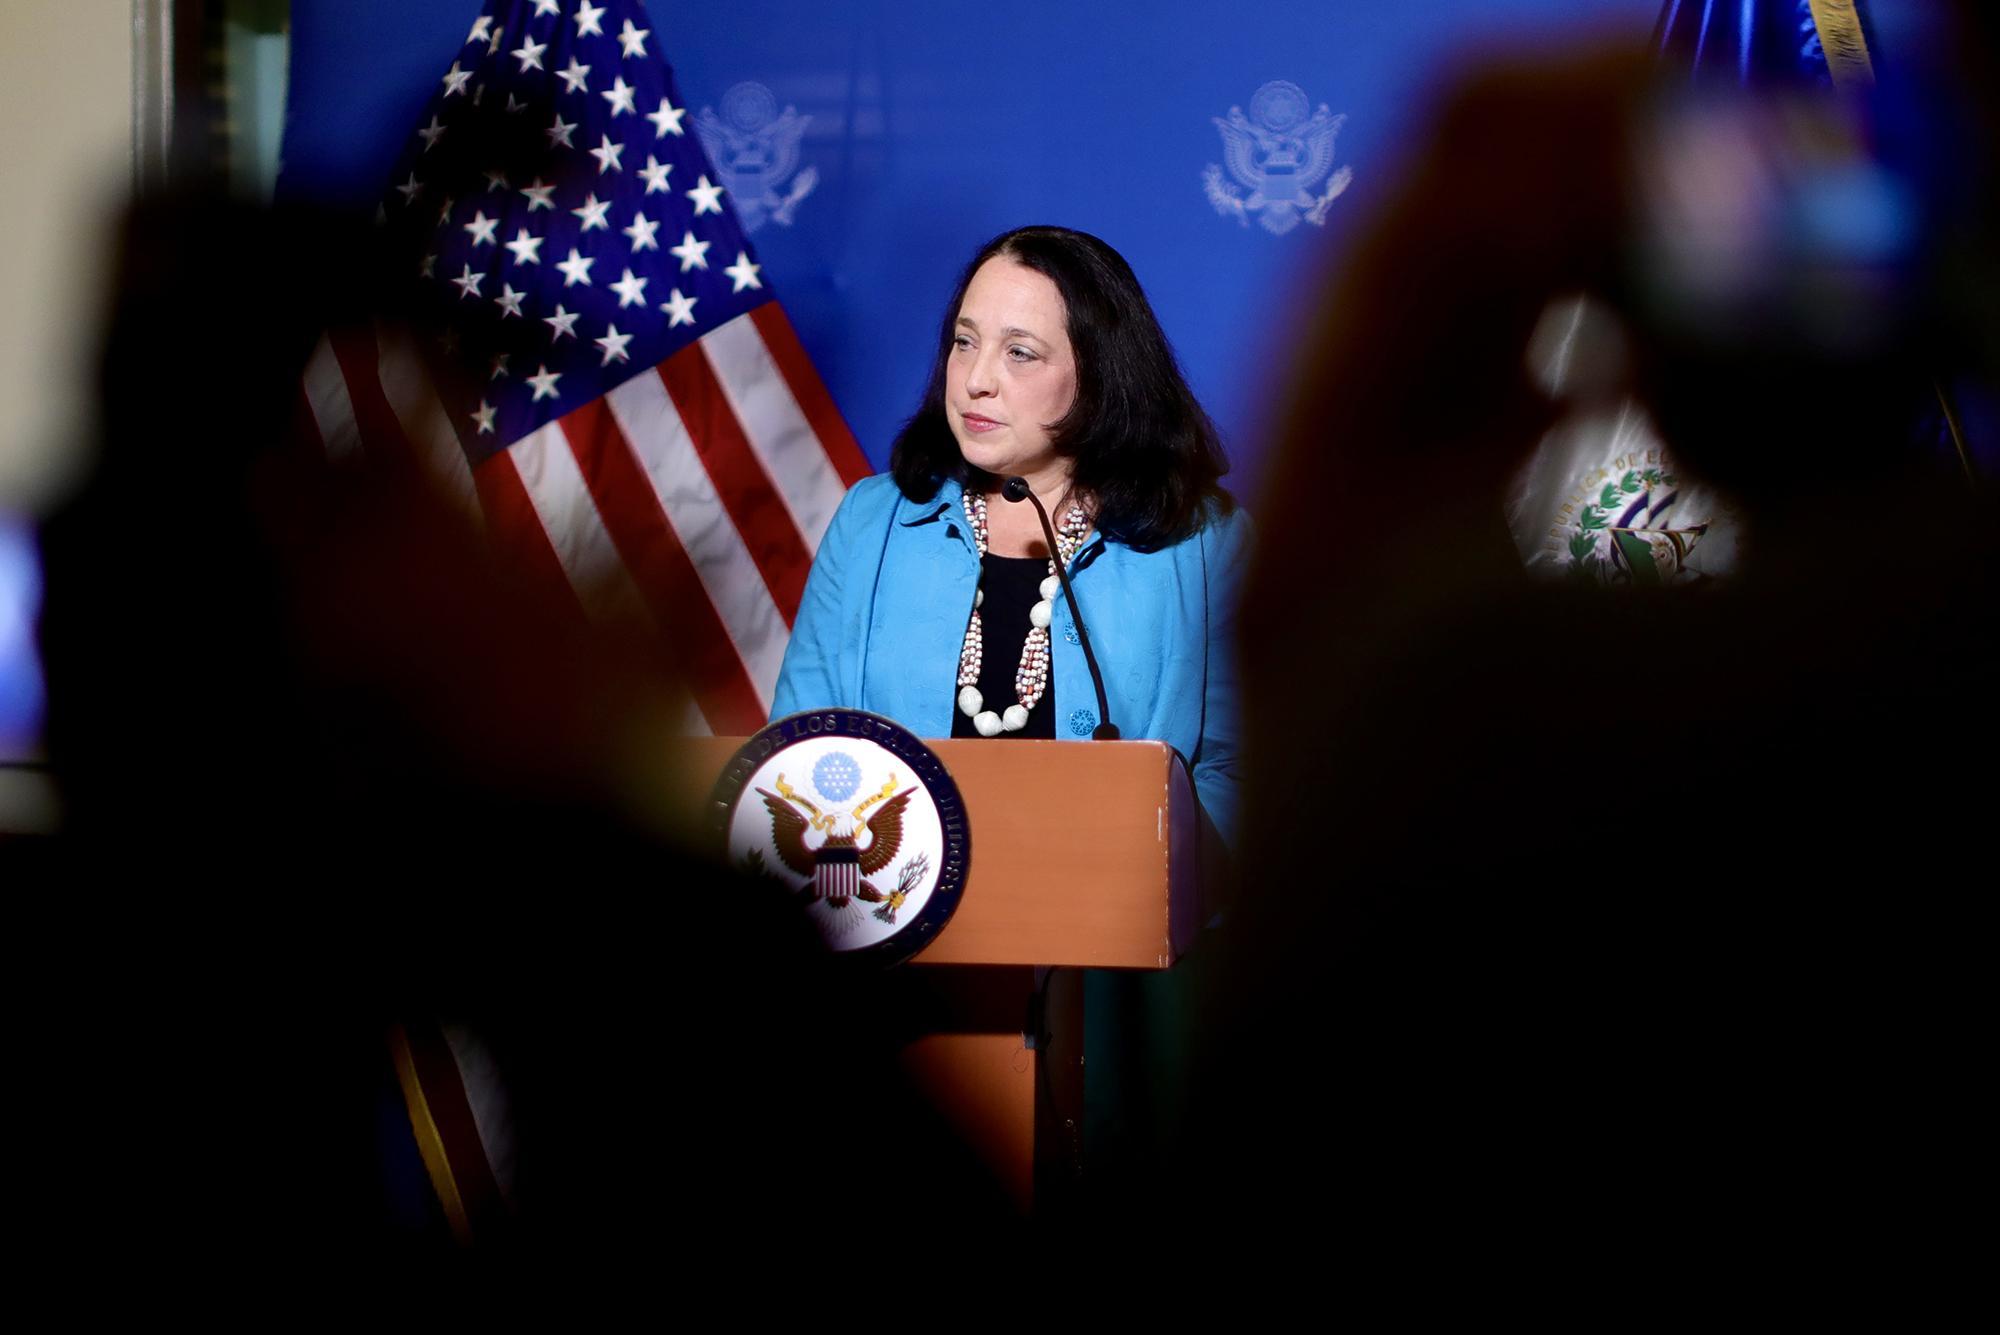 The chargée d'affaires at the U.S. Embassy in El Salvador speaks at a press conference on the night of September 4, 2021. Photo: U.S. Embassy